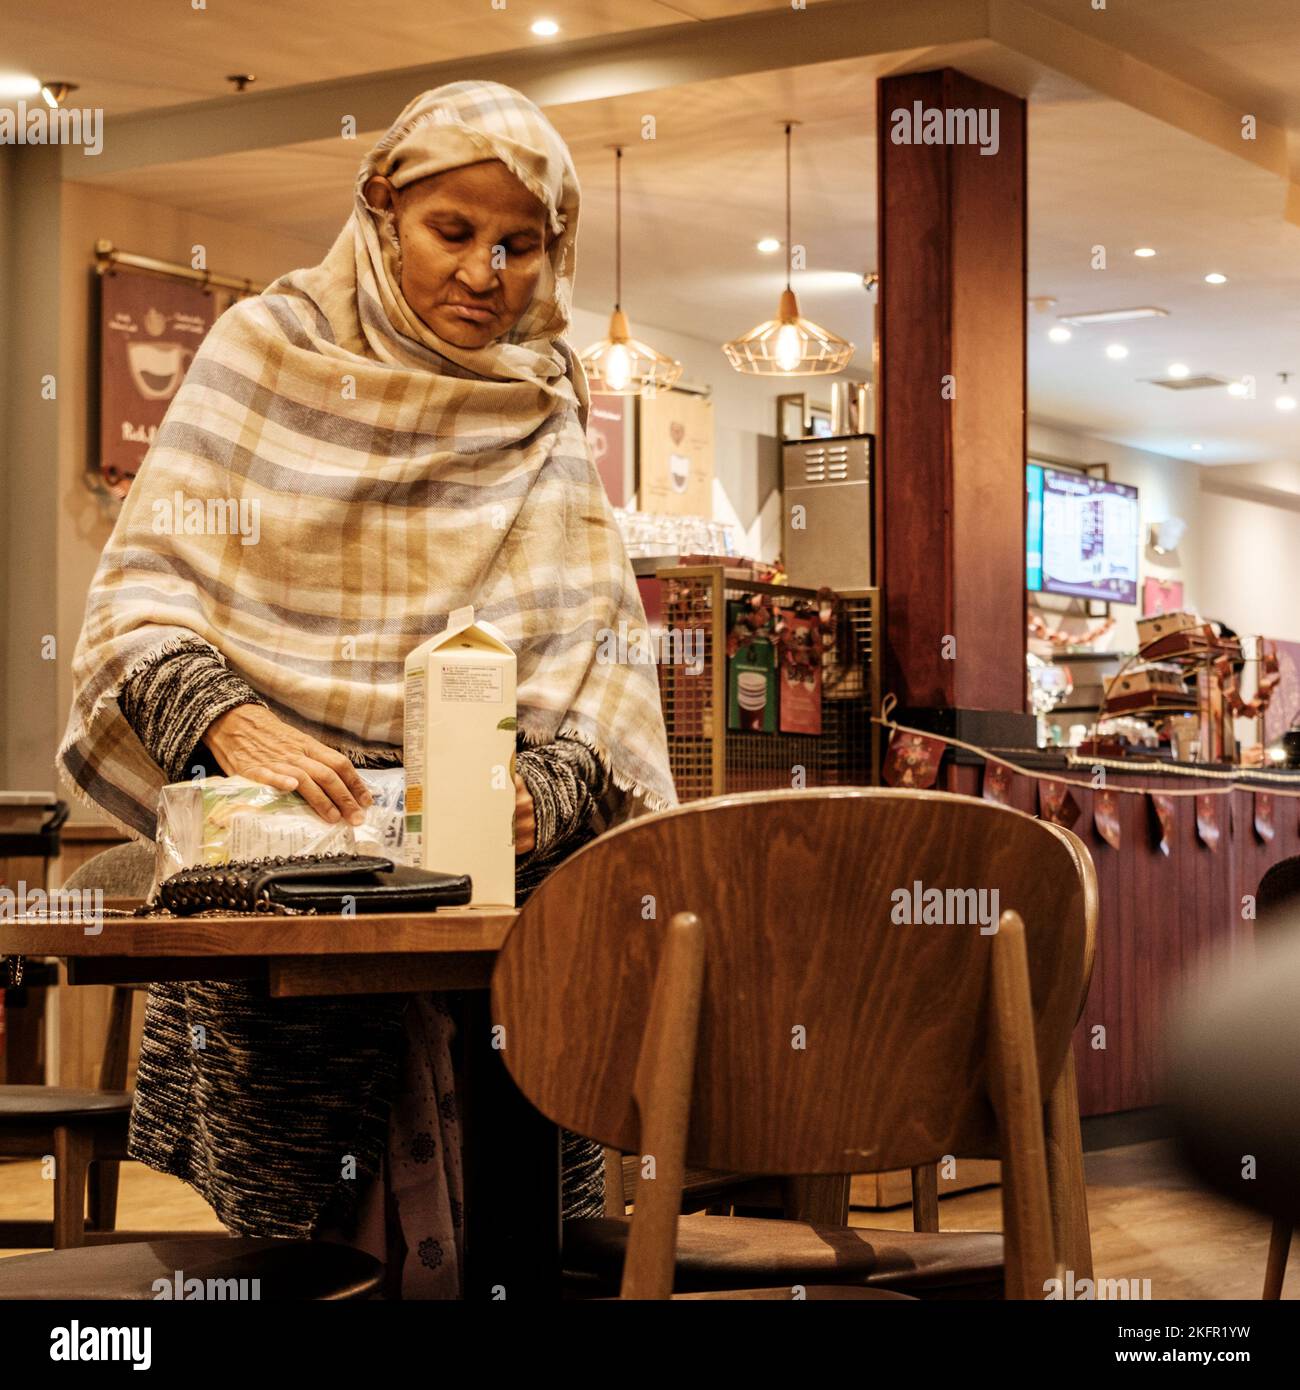 Epsom, Surrey, London UK, November 19 2022, Islamic Muslim Elderly Woman In Traditional Dress And Head Covering In A high Street Coffee Shop Stock Photo